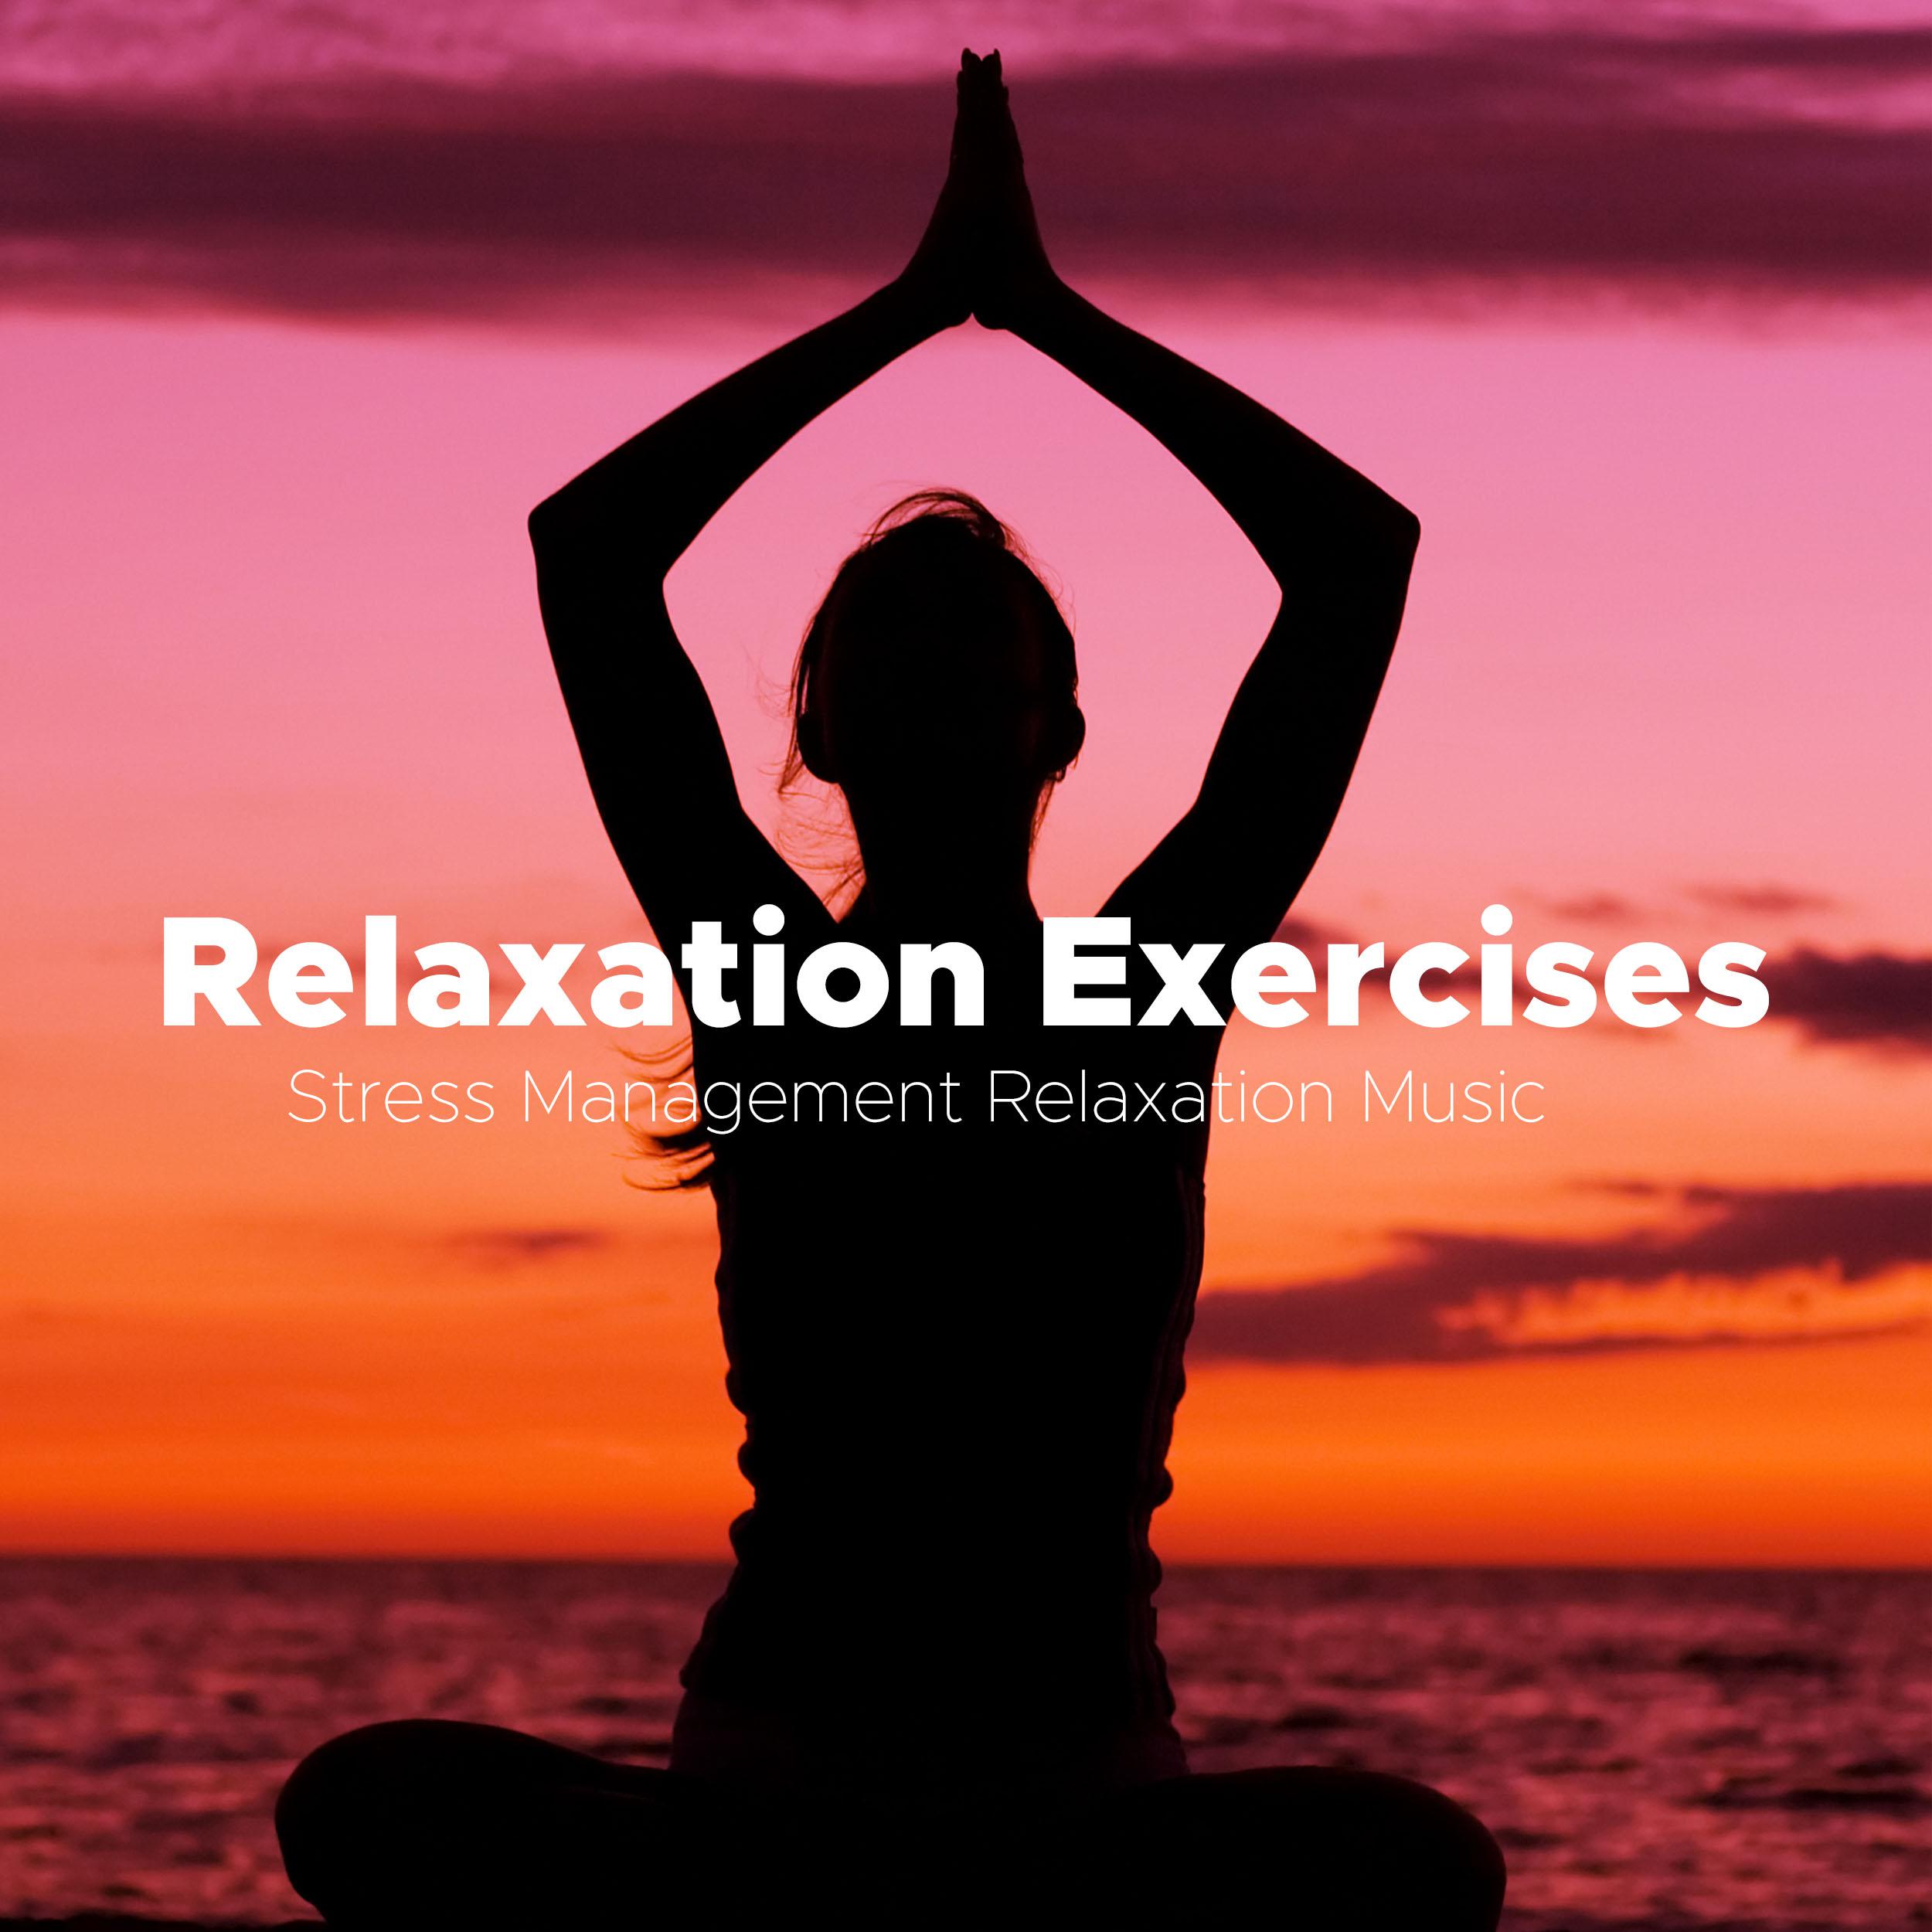 Relaxation Exercises - Stress Management Relaxation Music